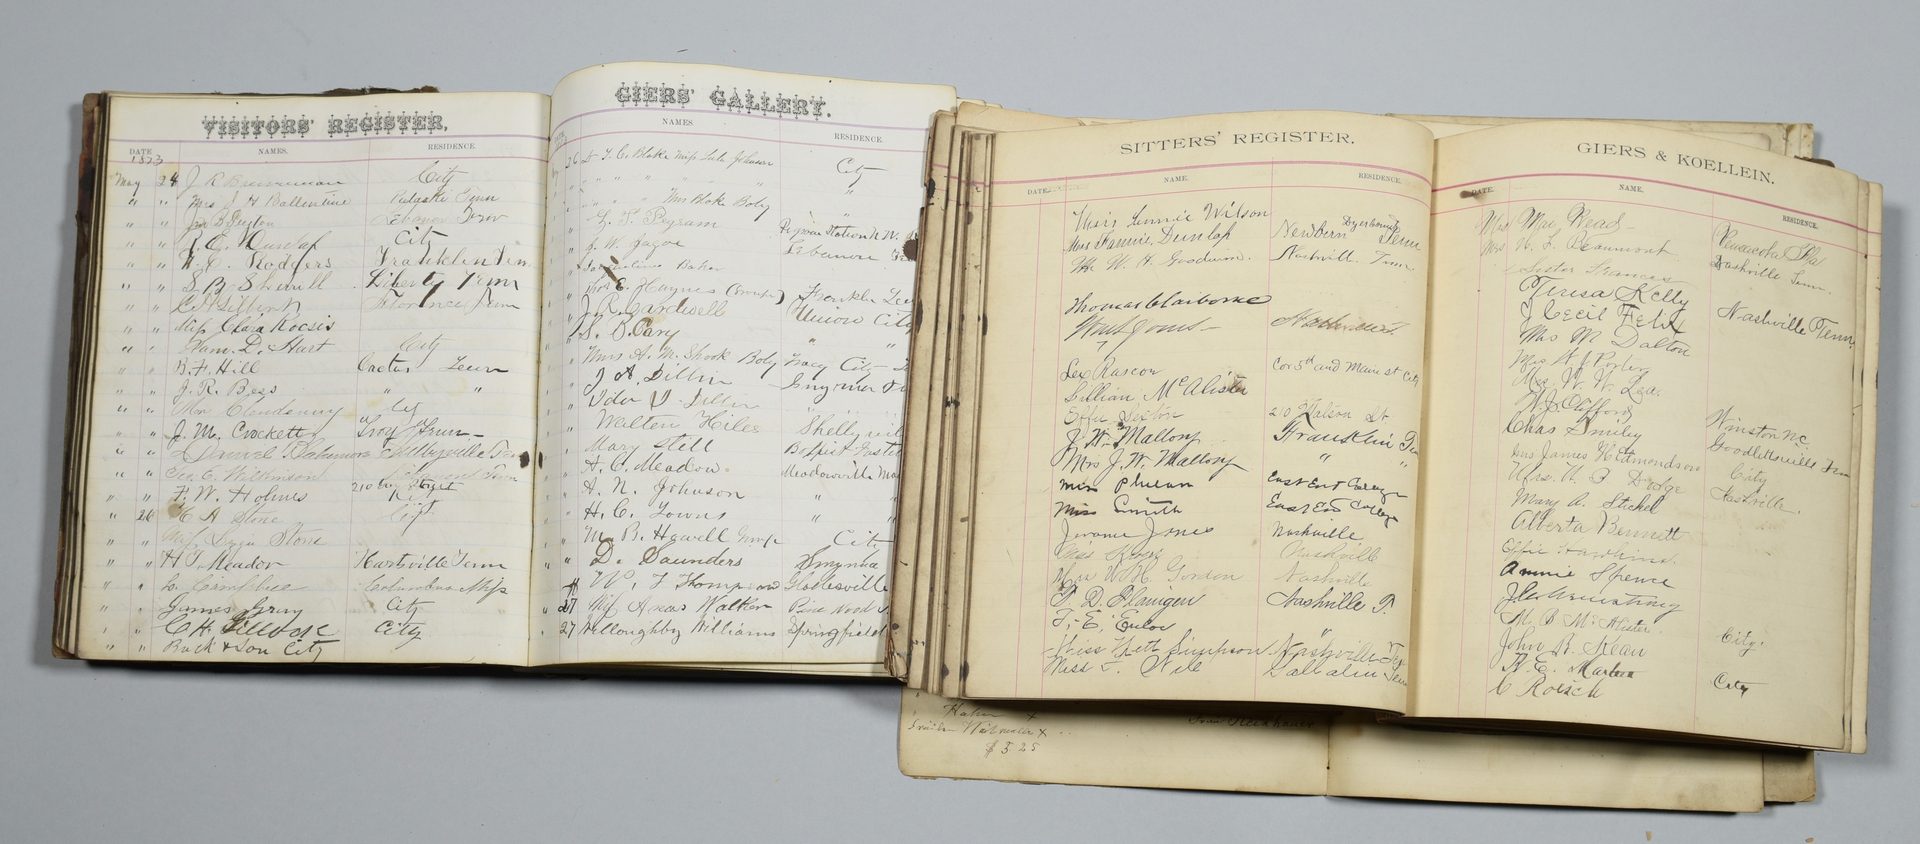 Lot 240: Giers Photo Gallery Account Books, Archive